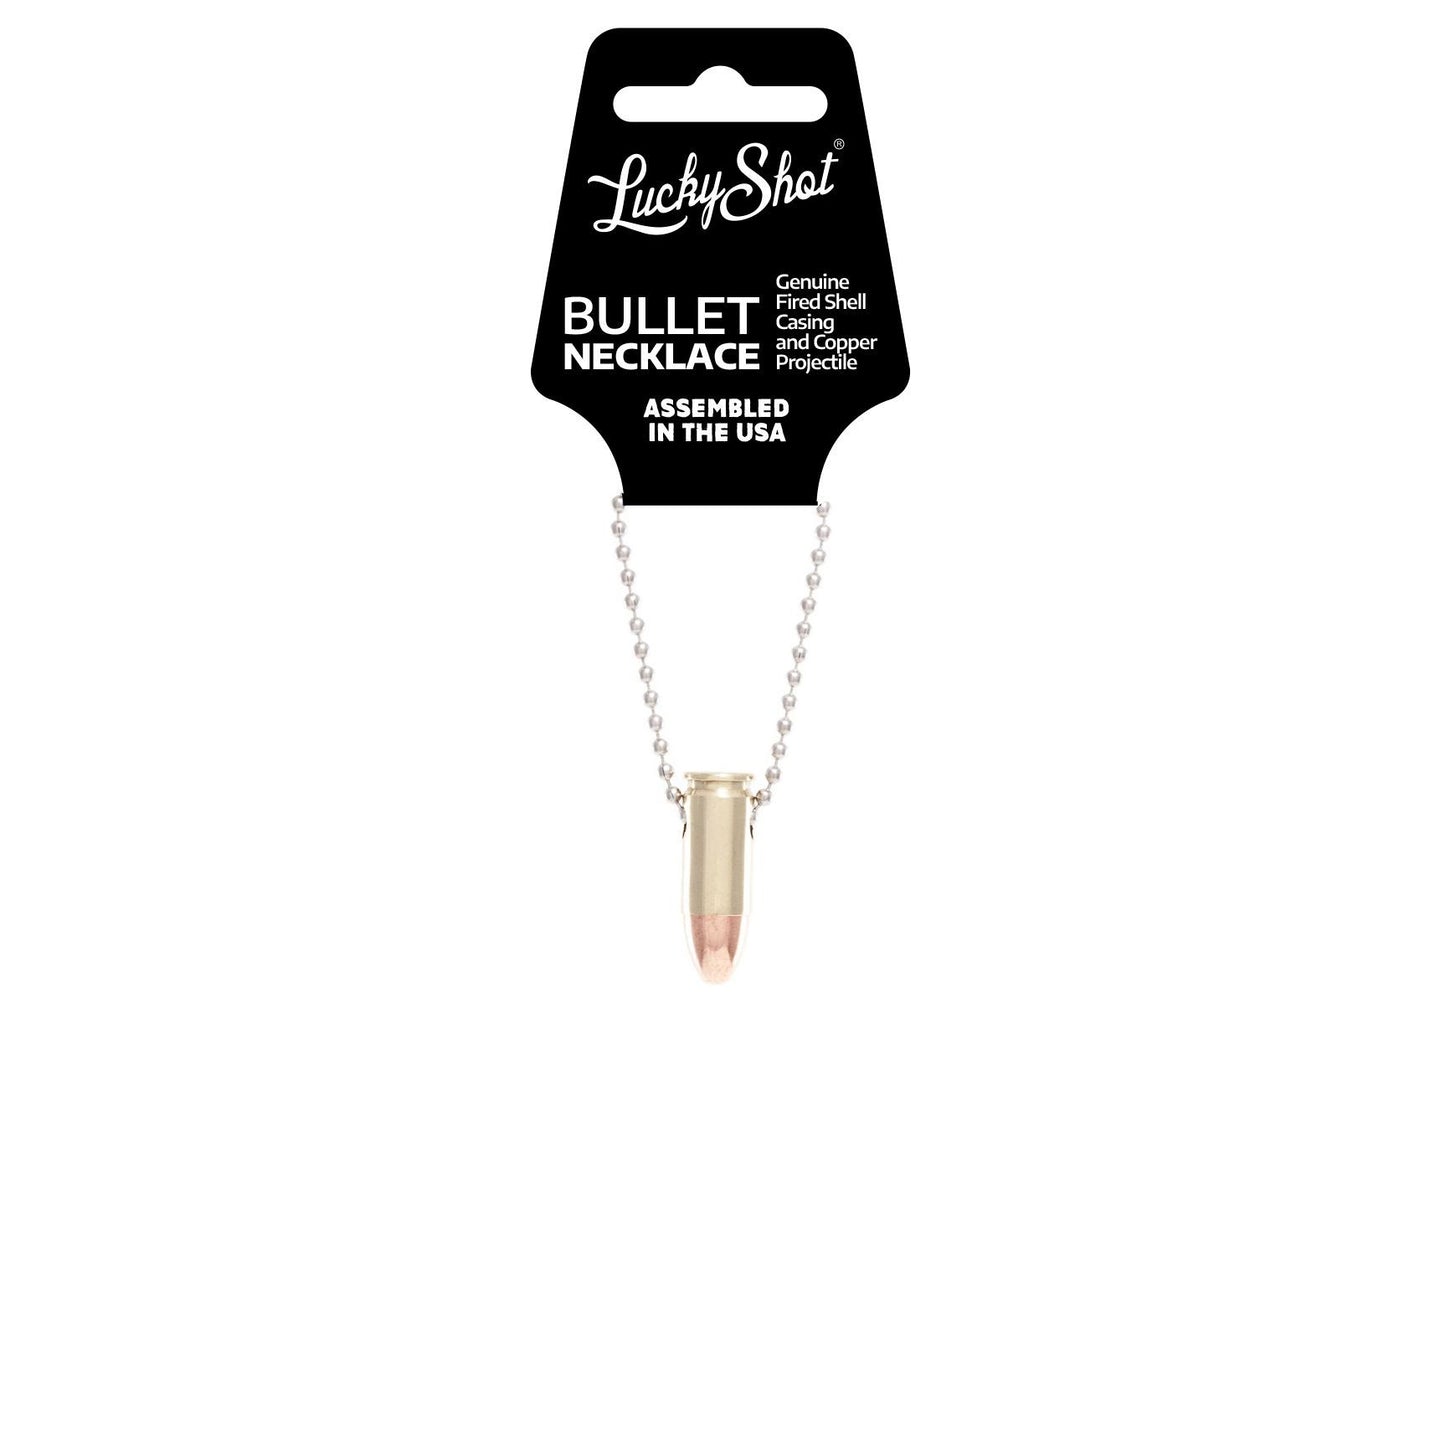 Lucky Shot Bullet Necklace .308 Caliber Ball Chain Necklace